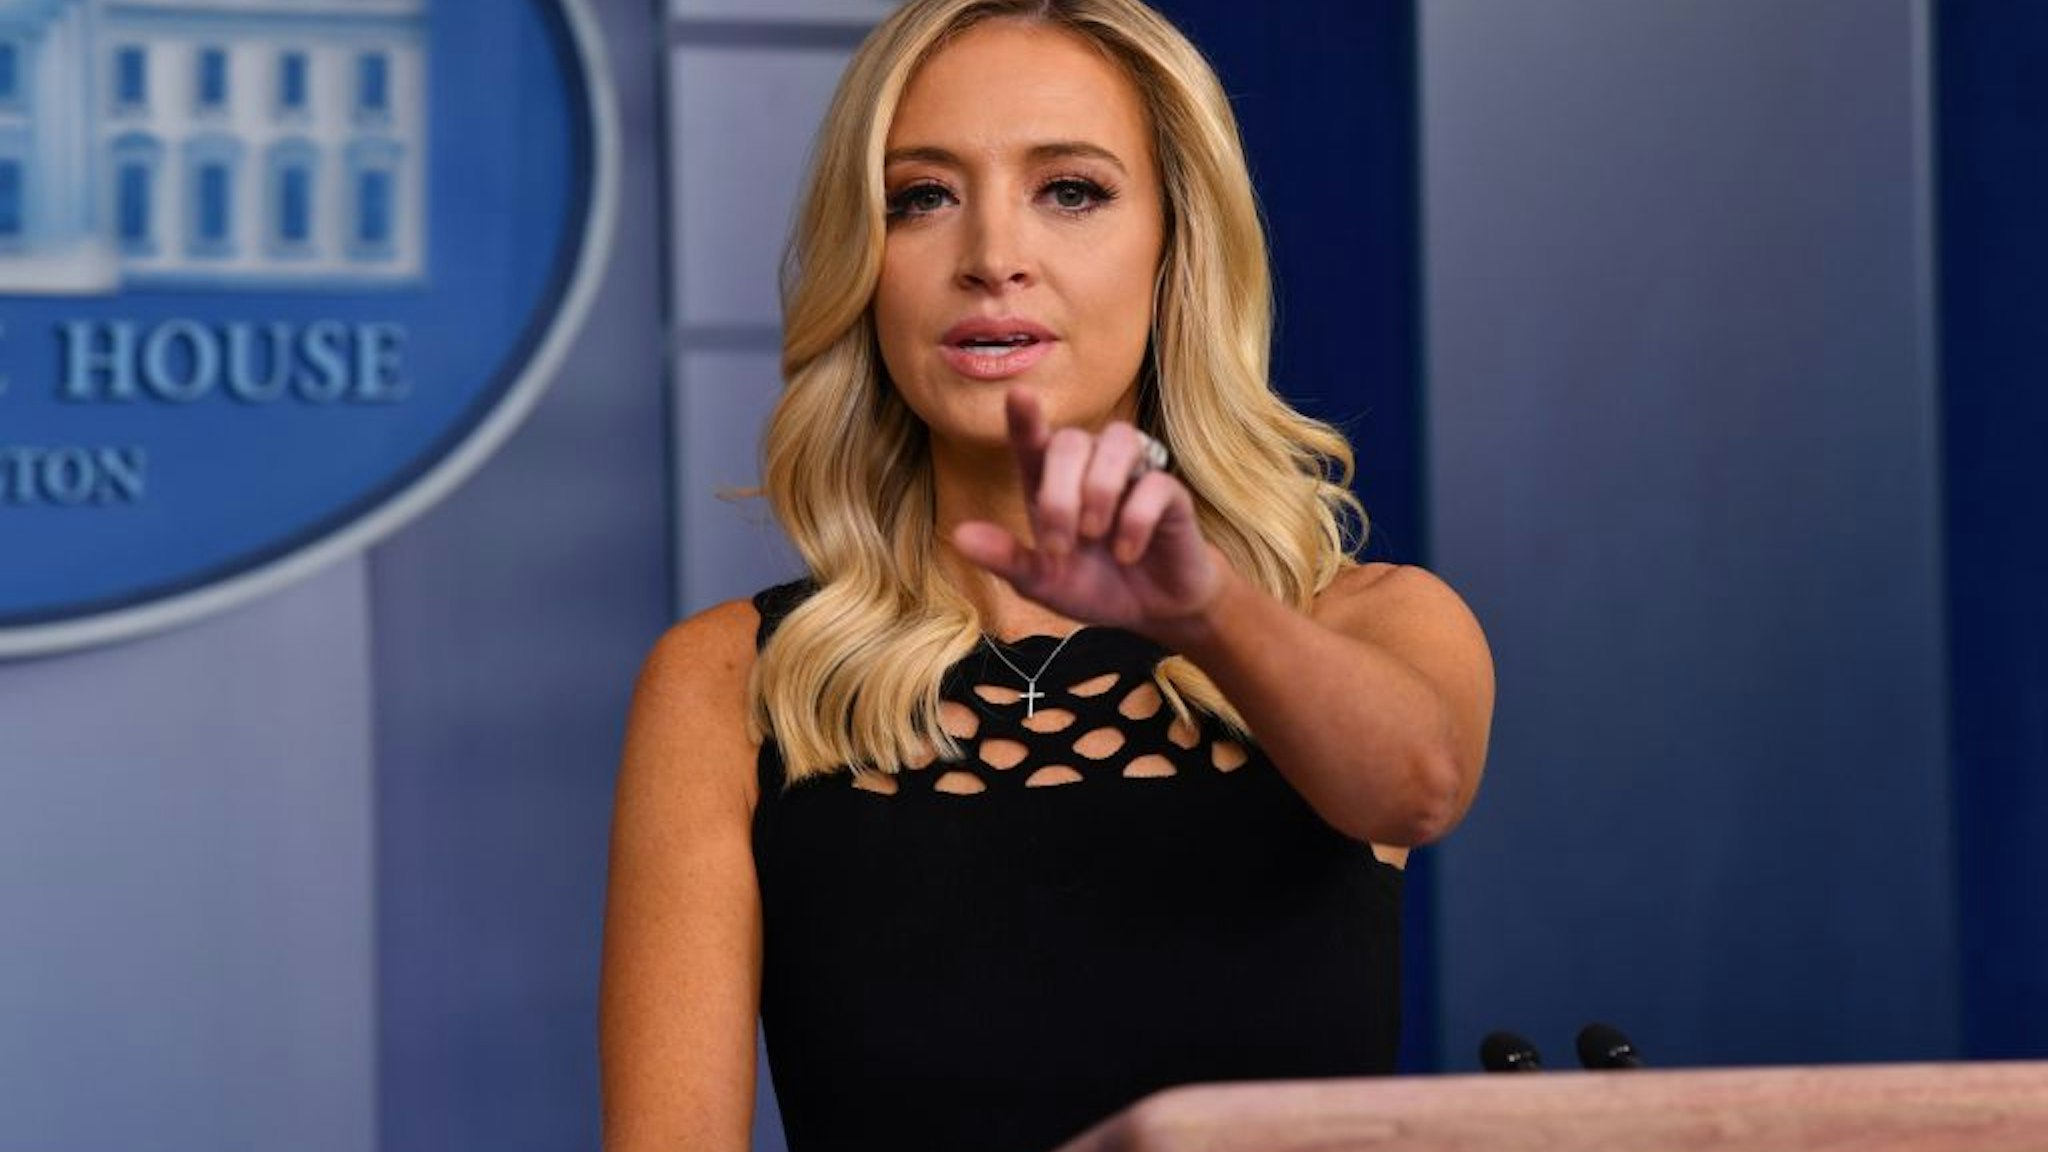 White House Press Secretary Kayleigh McEnany speaks to the press on June 19, 2020, in the Brady Briefing Room of the White House in Washington, DC.